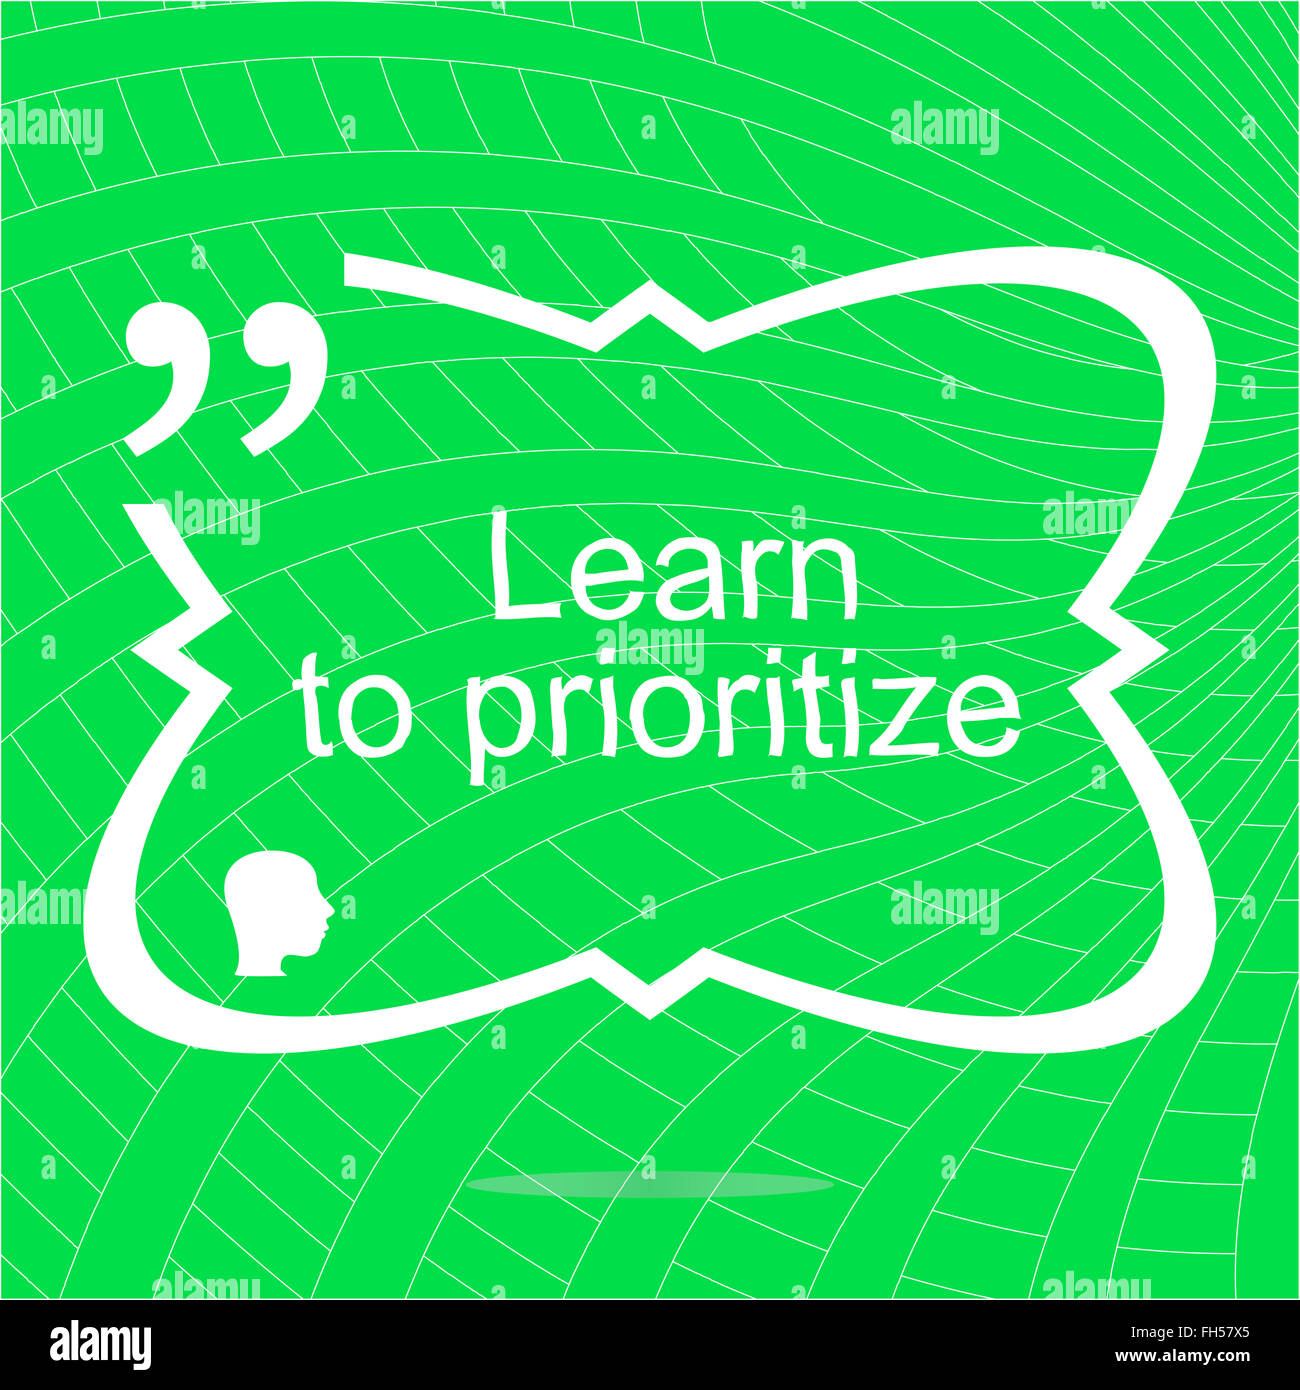 Learn to prioritize. Inspirational motivational quote. Simple trendy design. Positive quote. Vector illustration Stock Photo